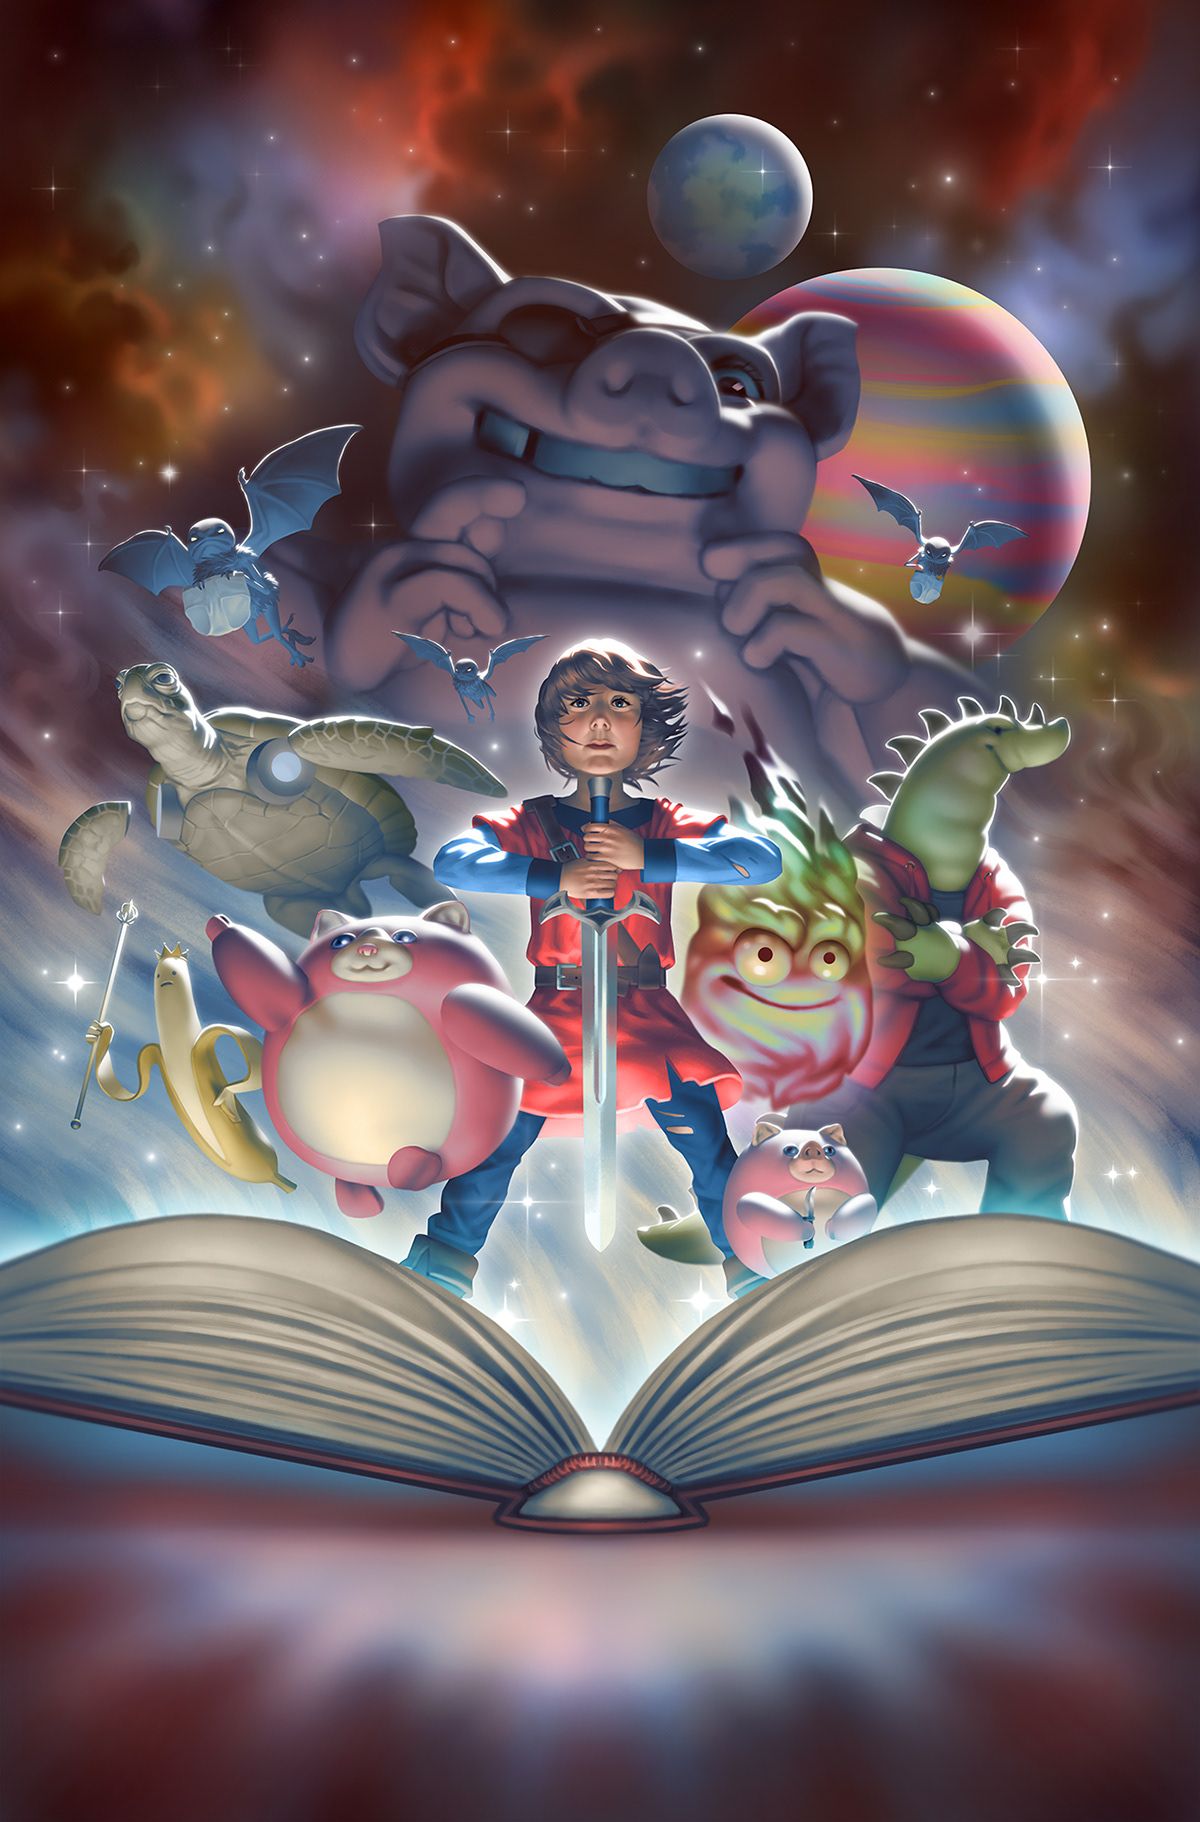 childrens illustration galaxy imaginary friends imagination kid and sword kid with sword movie poster Scifi Space  Space Drama